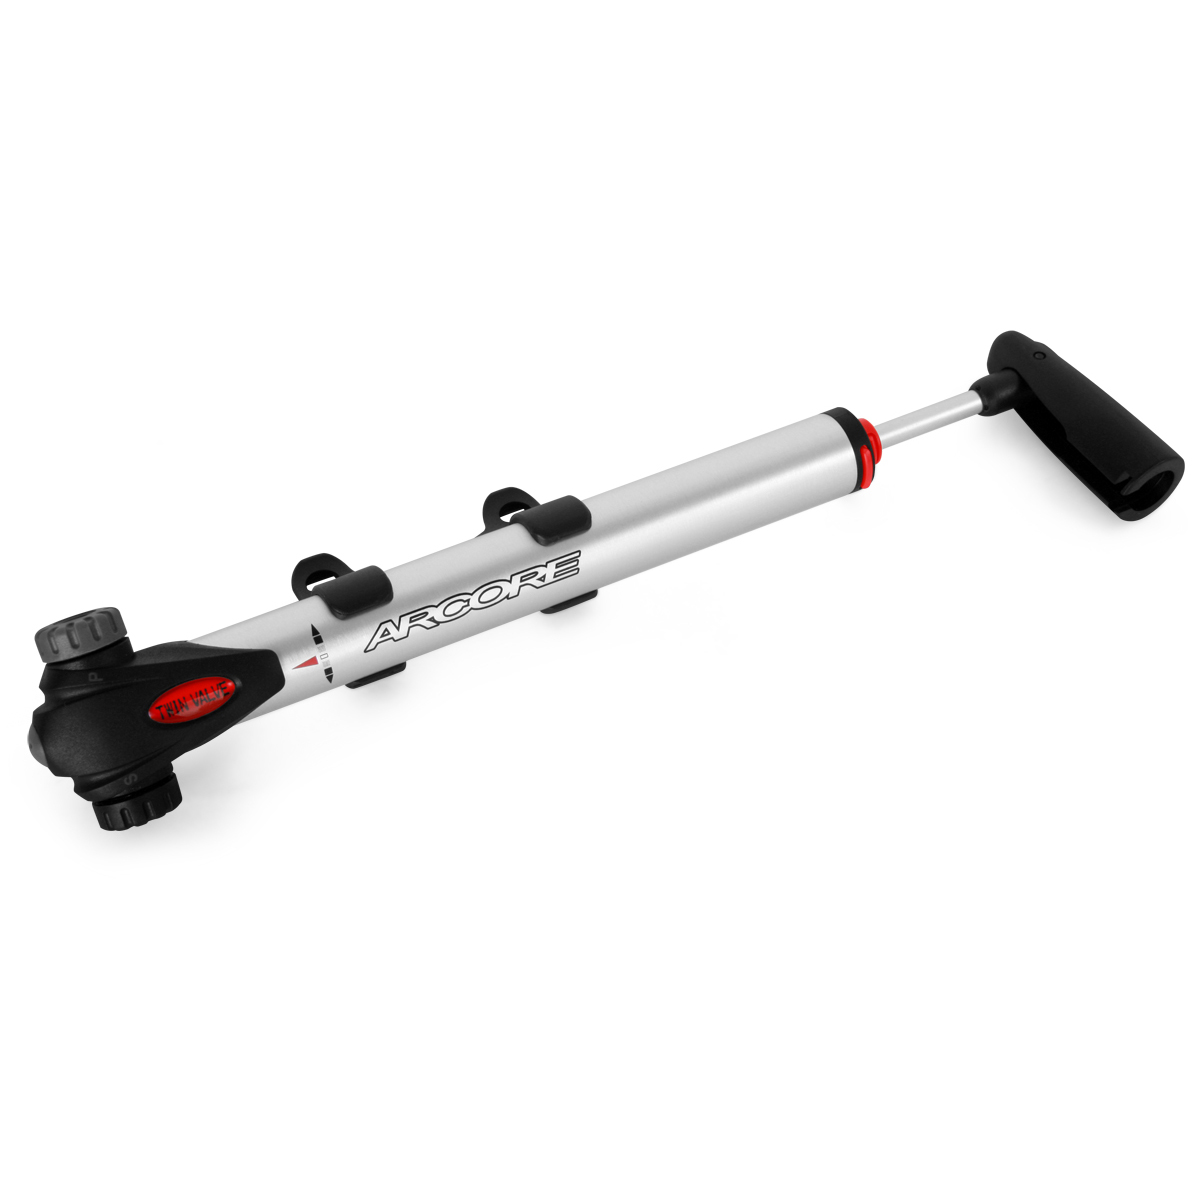 APS-5A - Bicycle pump with mounting under the bottle holder